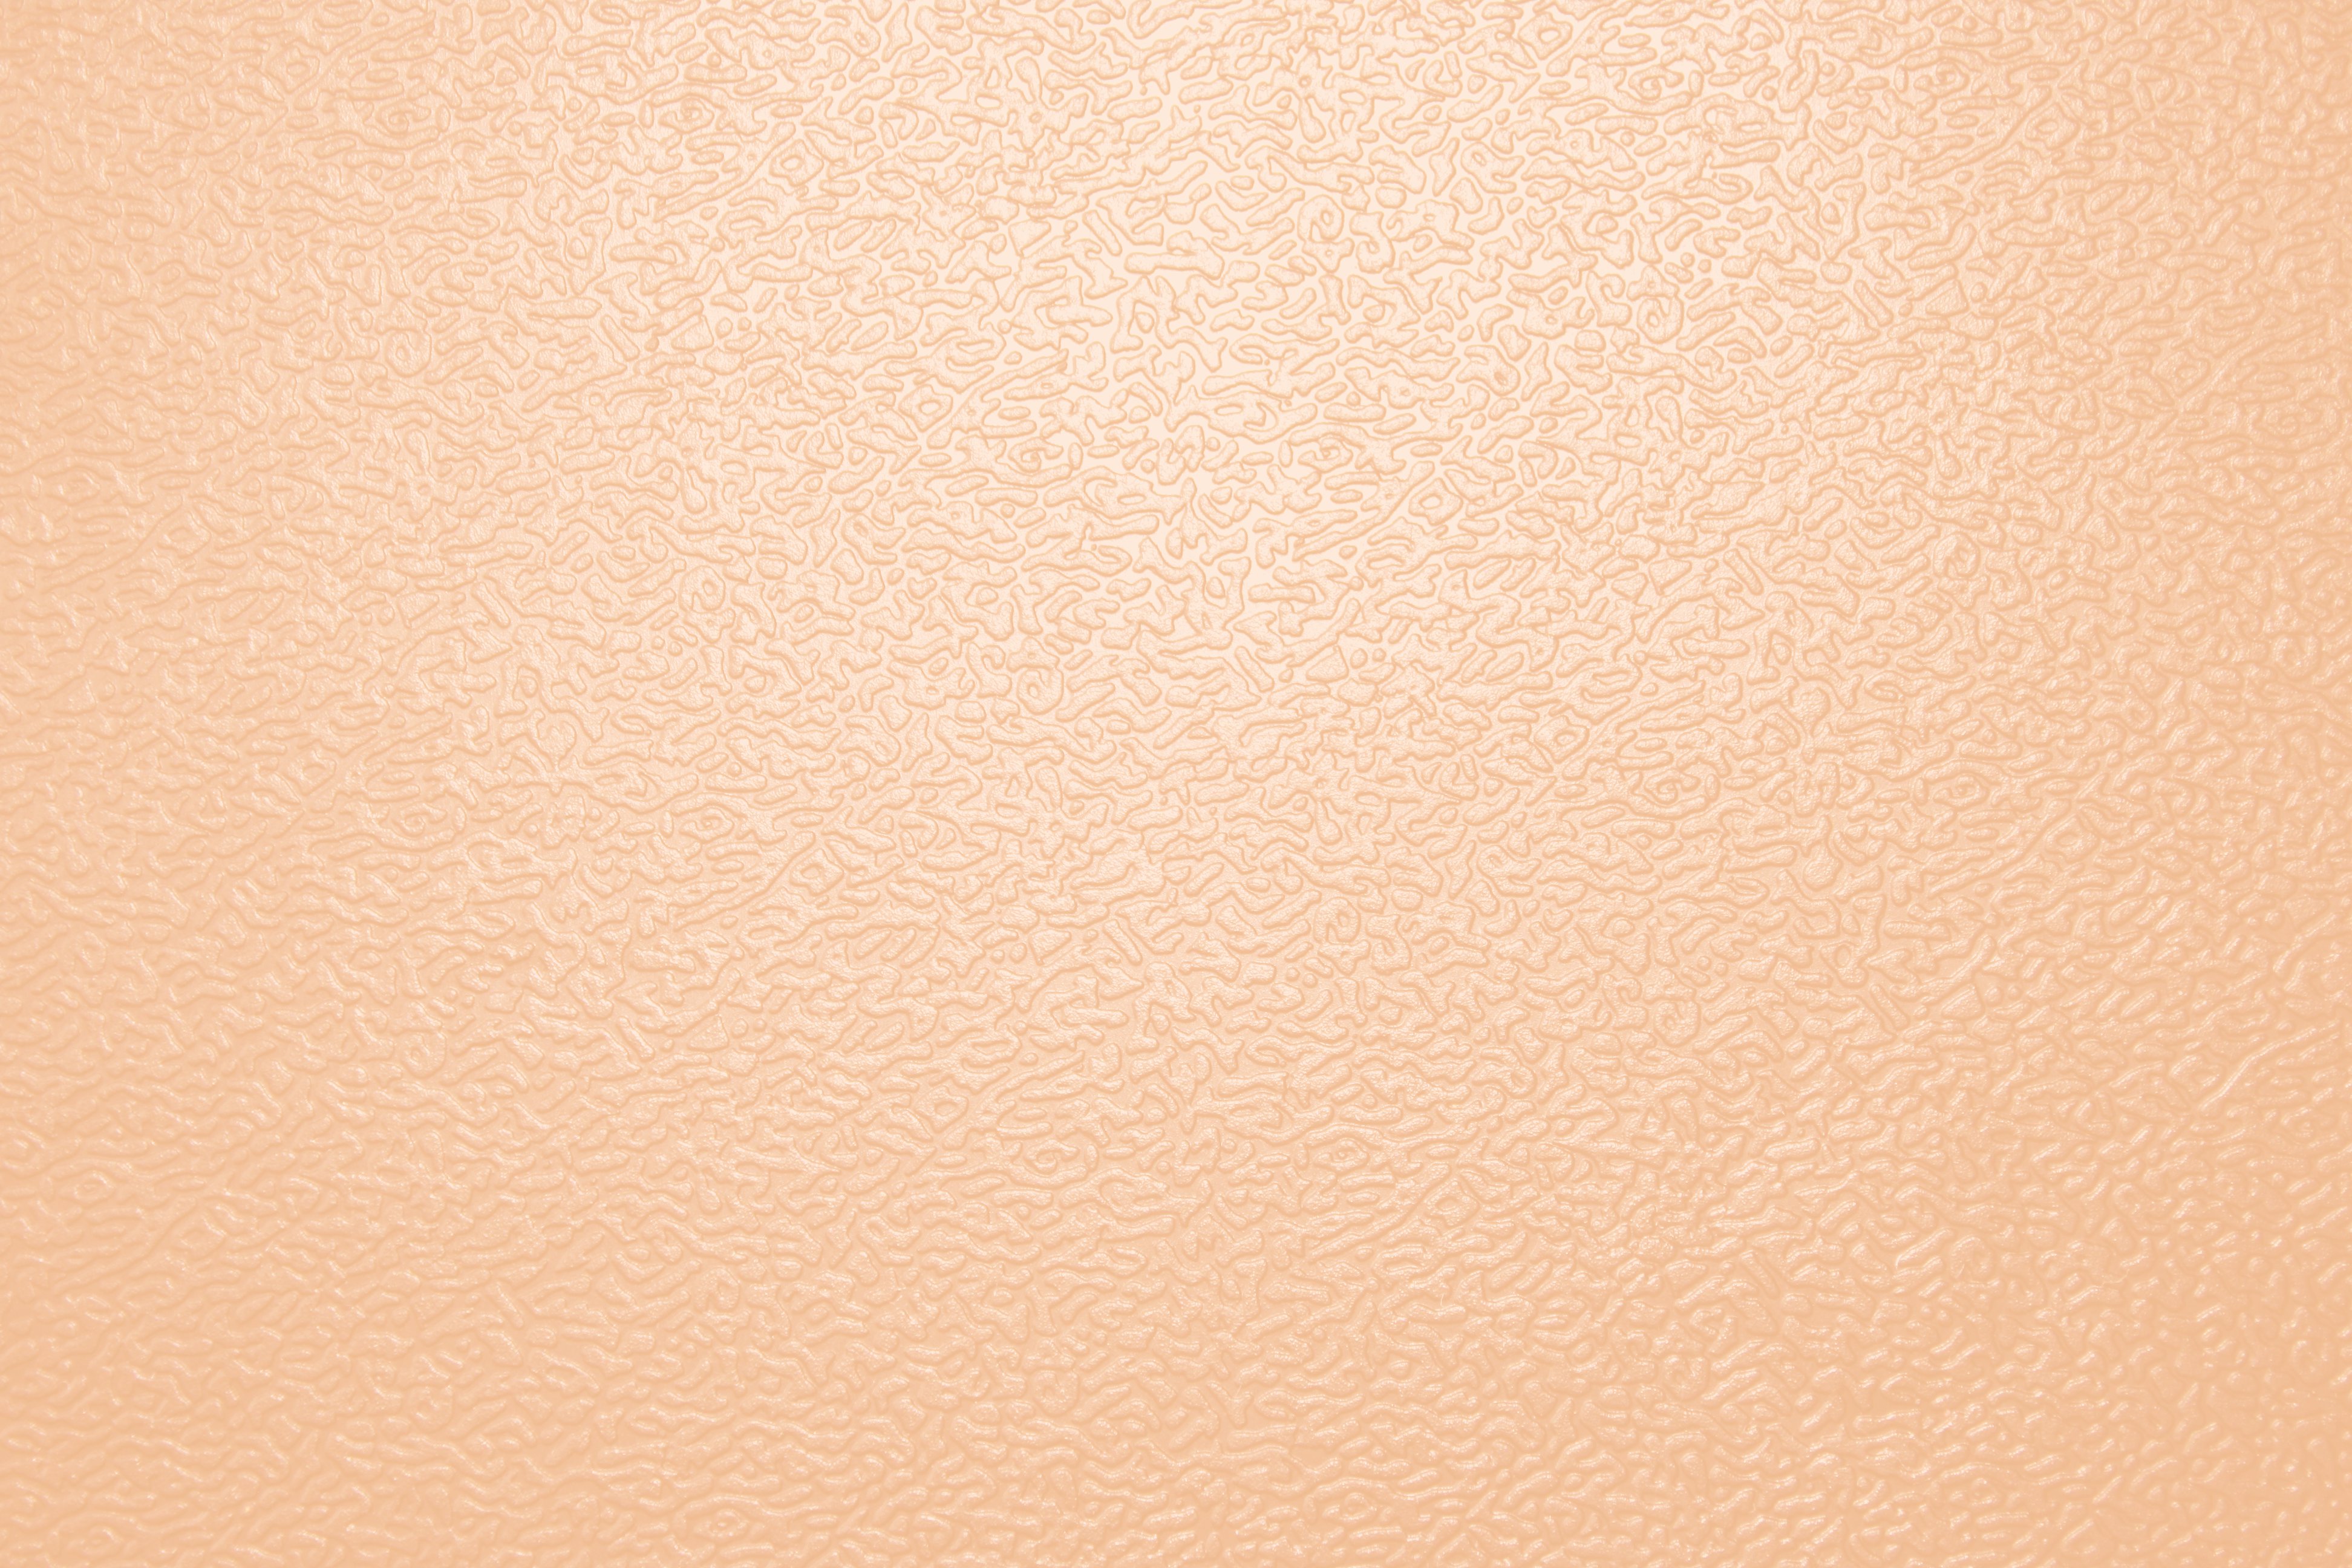 Textured Peach Colored Plastic Close Up   Free High Resolution Photo